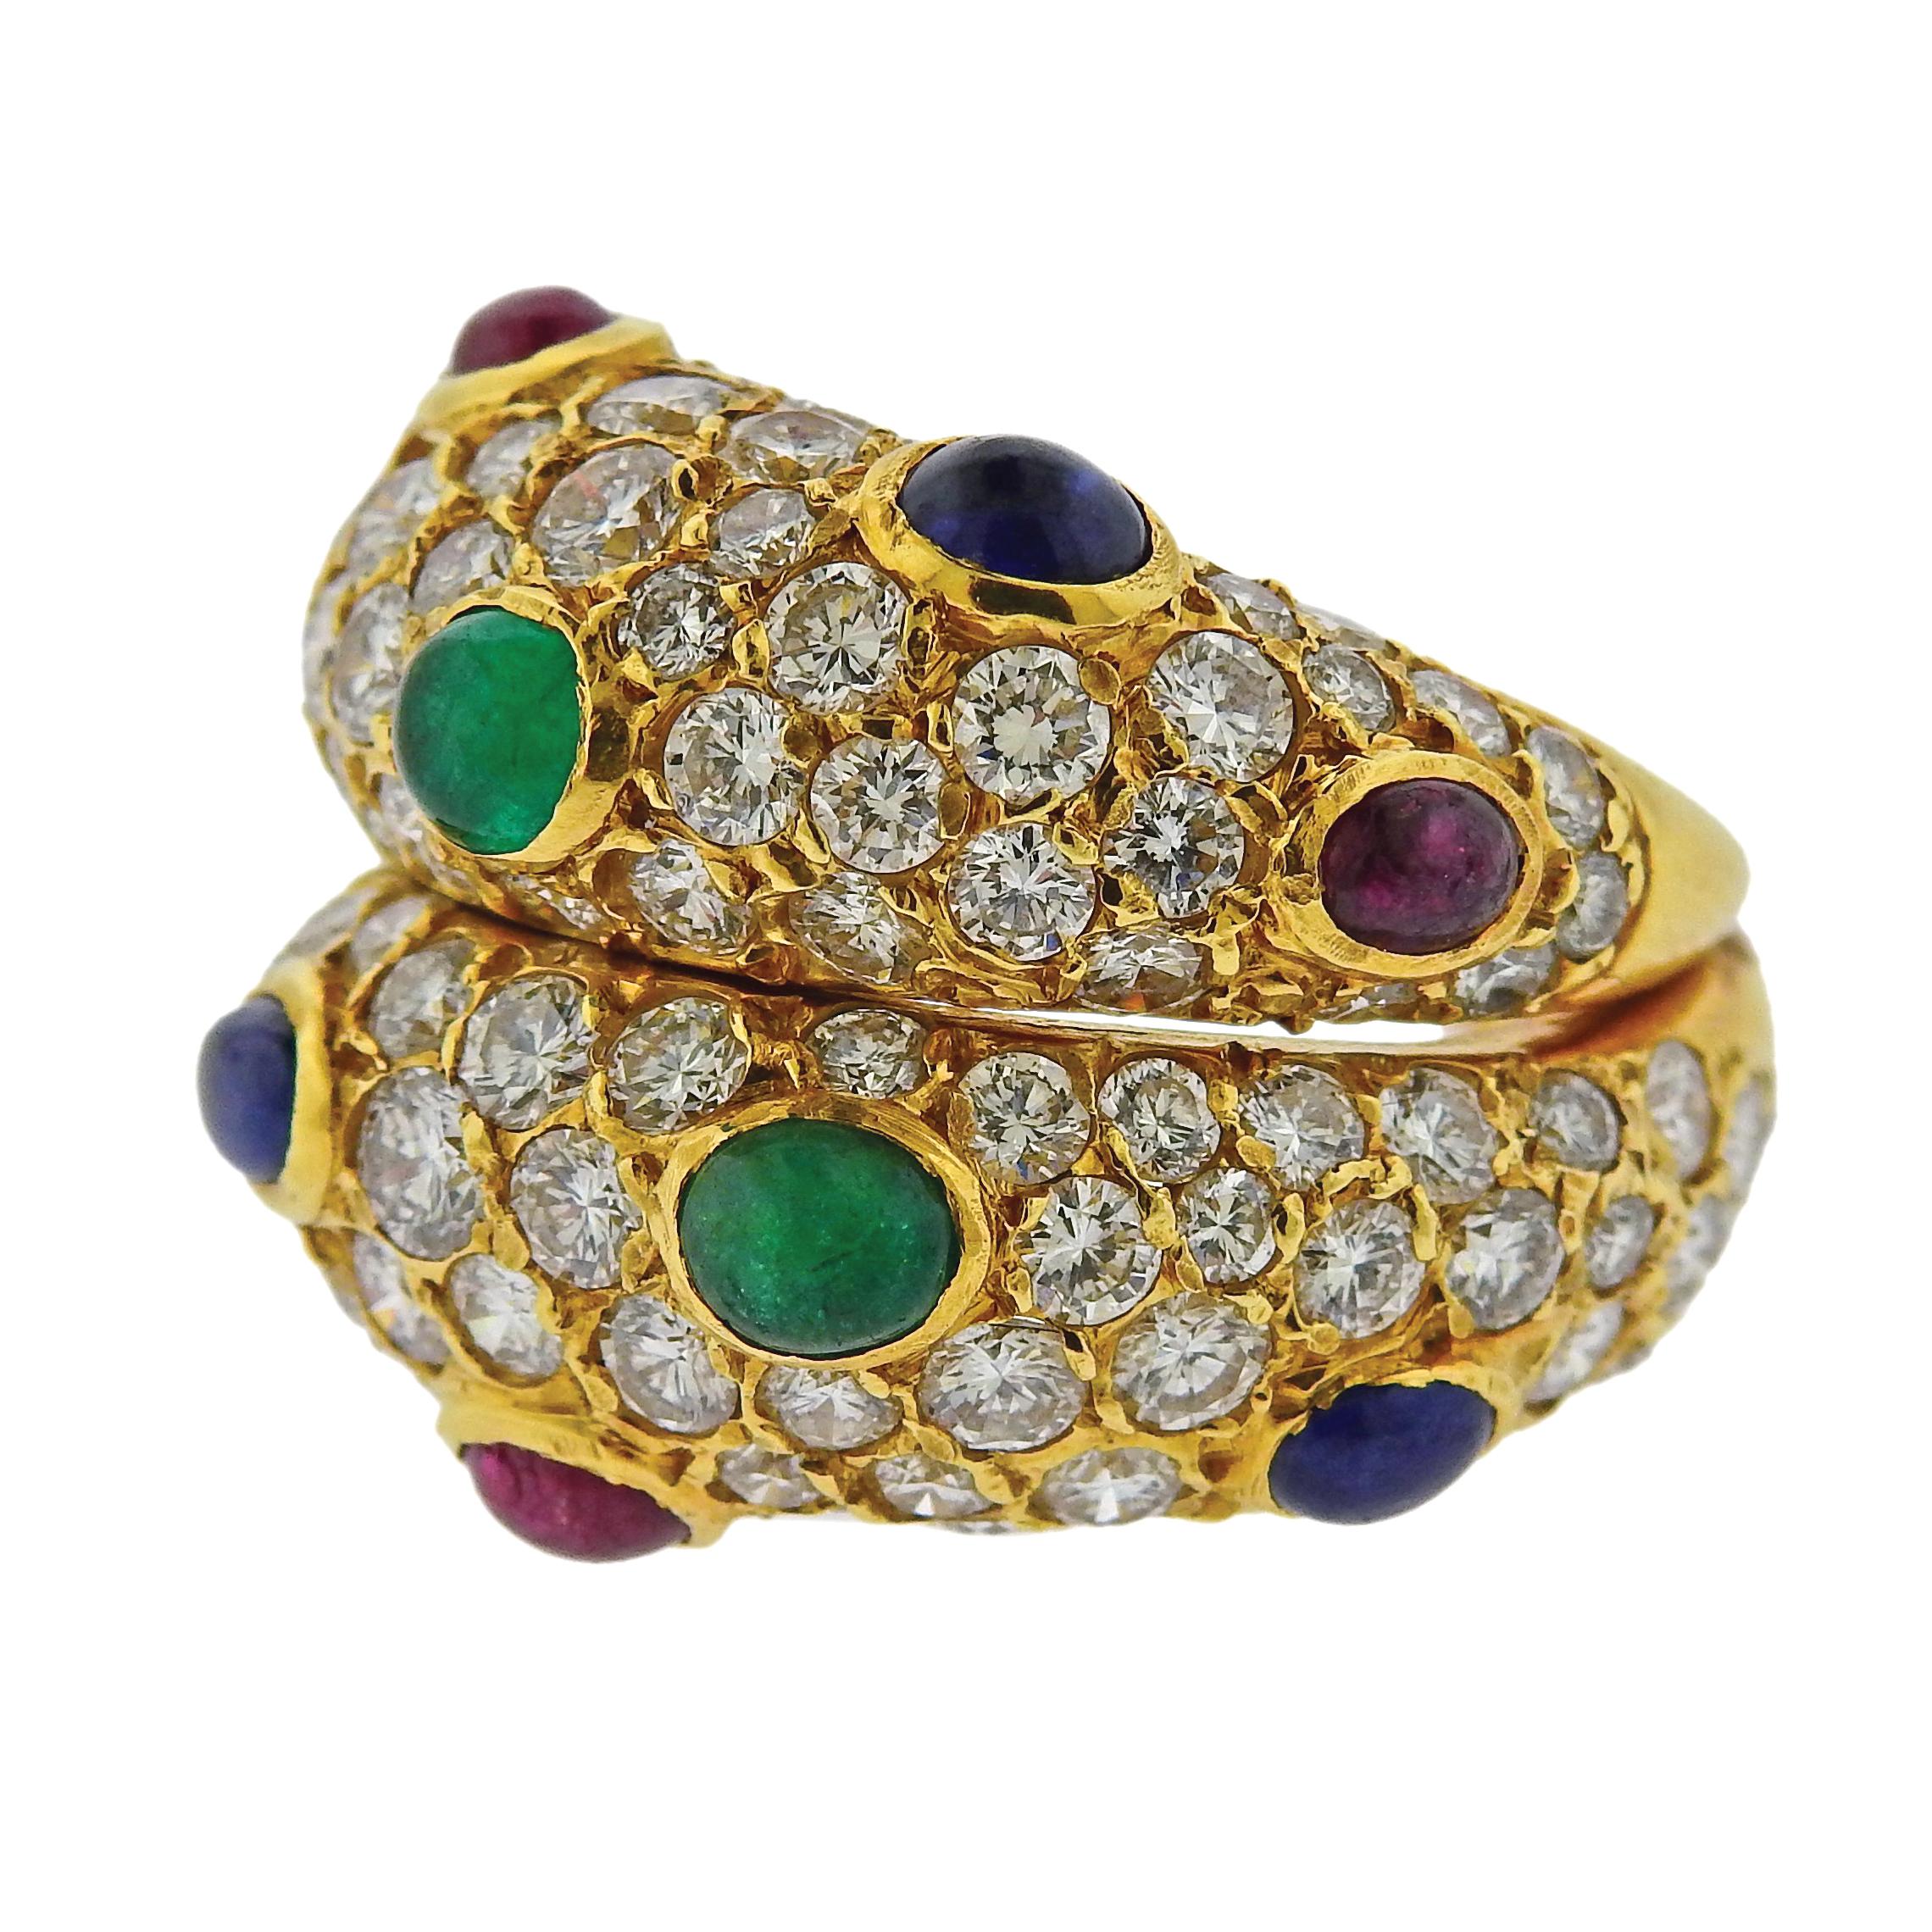 18k gold dome ring, crafted by Fred Paris, set with sapphire, emeralds and ruby cabochons, surrounded with approx. 4.00ctw in diamonds. Ring size - 4.25, ring top is 19mm wide. Marked Fred Paris, French marks. Weighs 14.6 grams.

SKU#R-03064